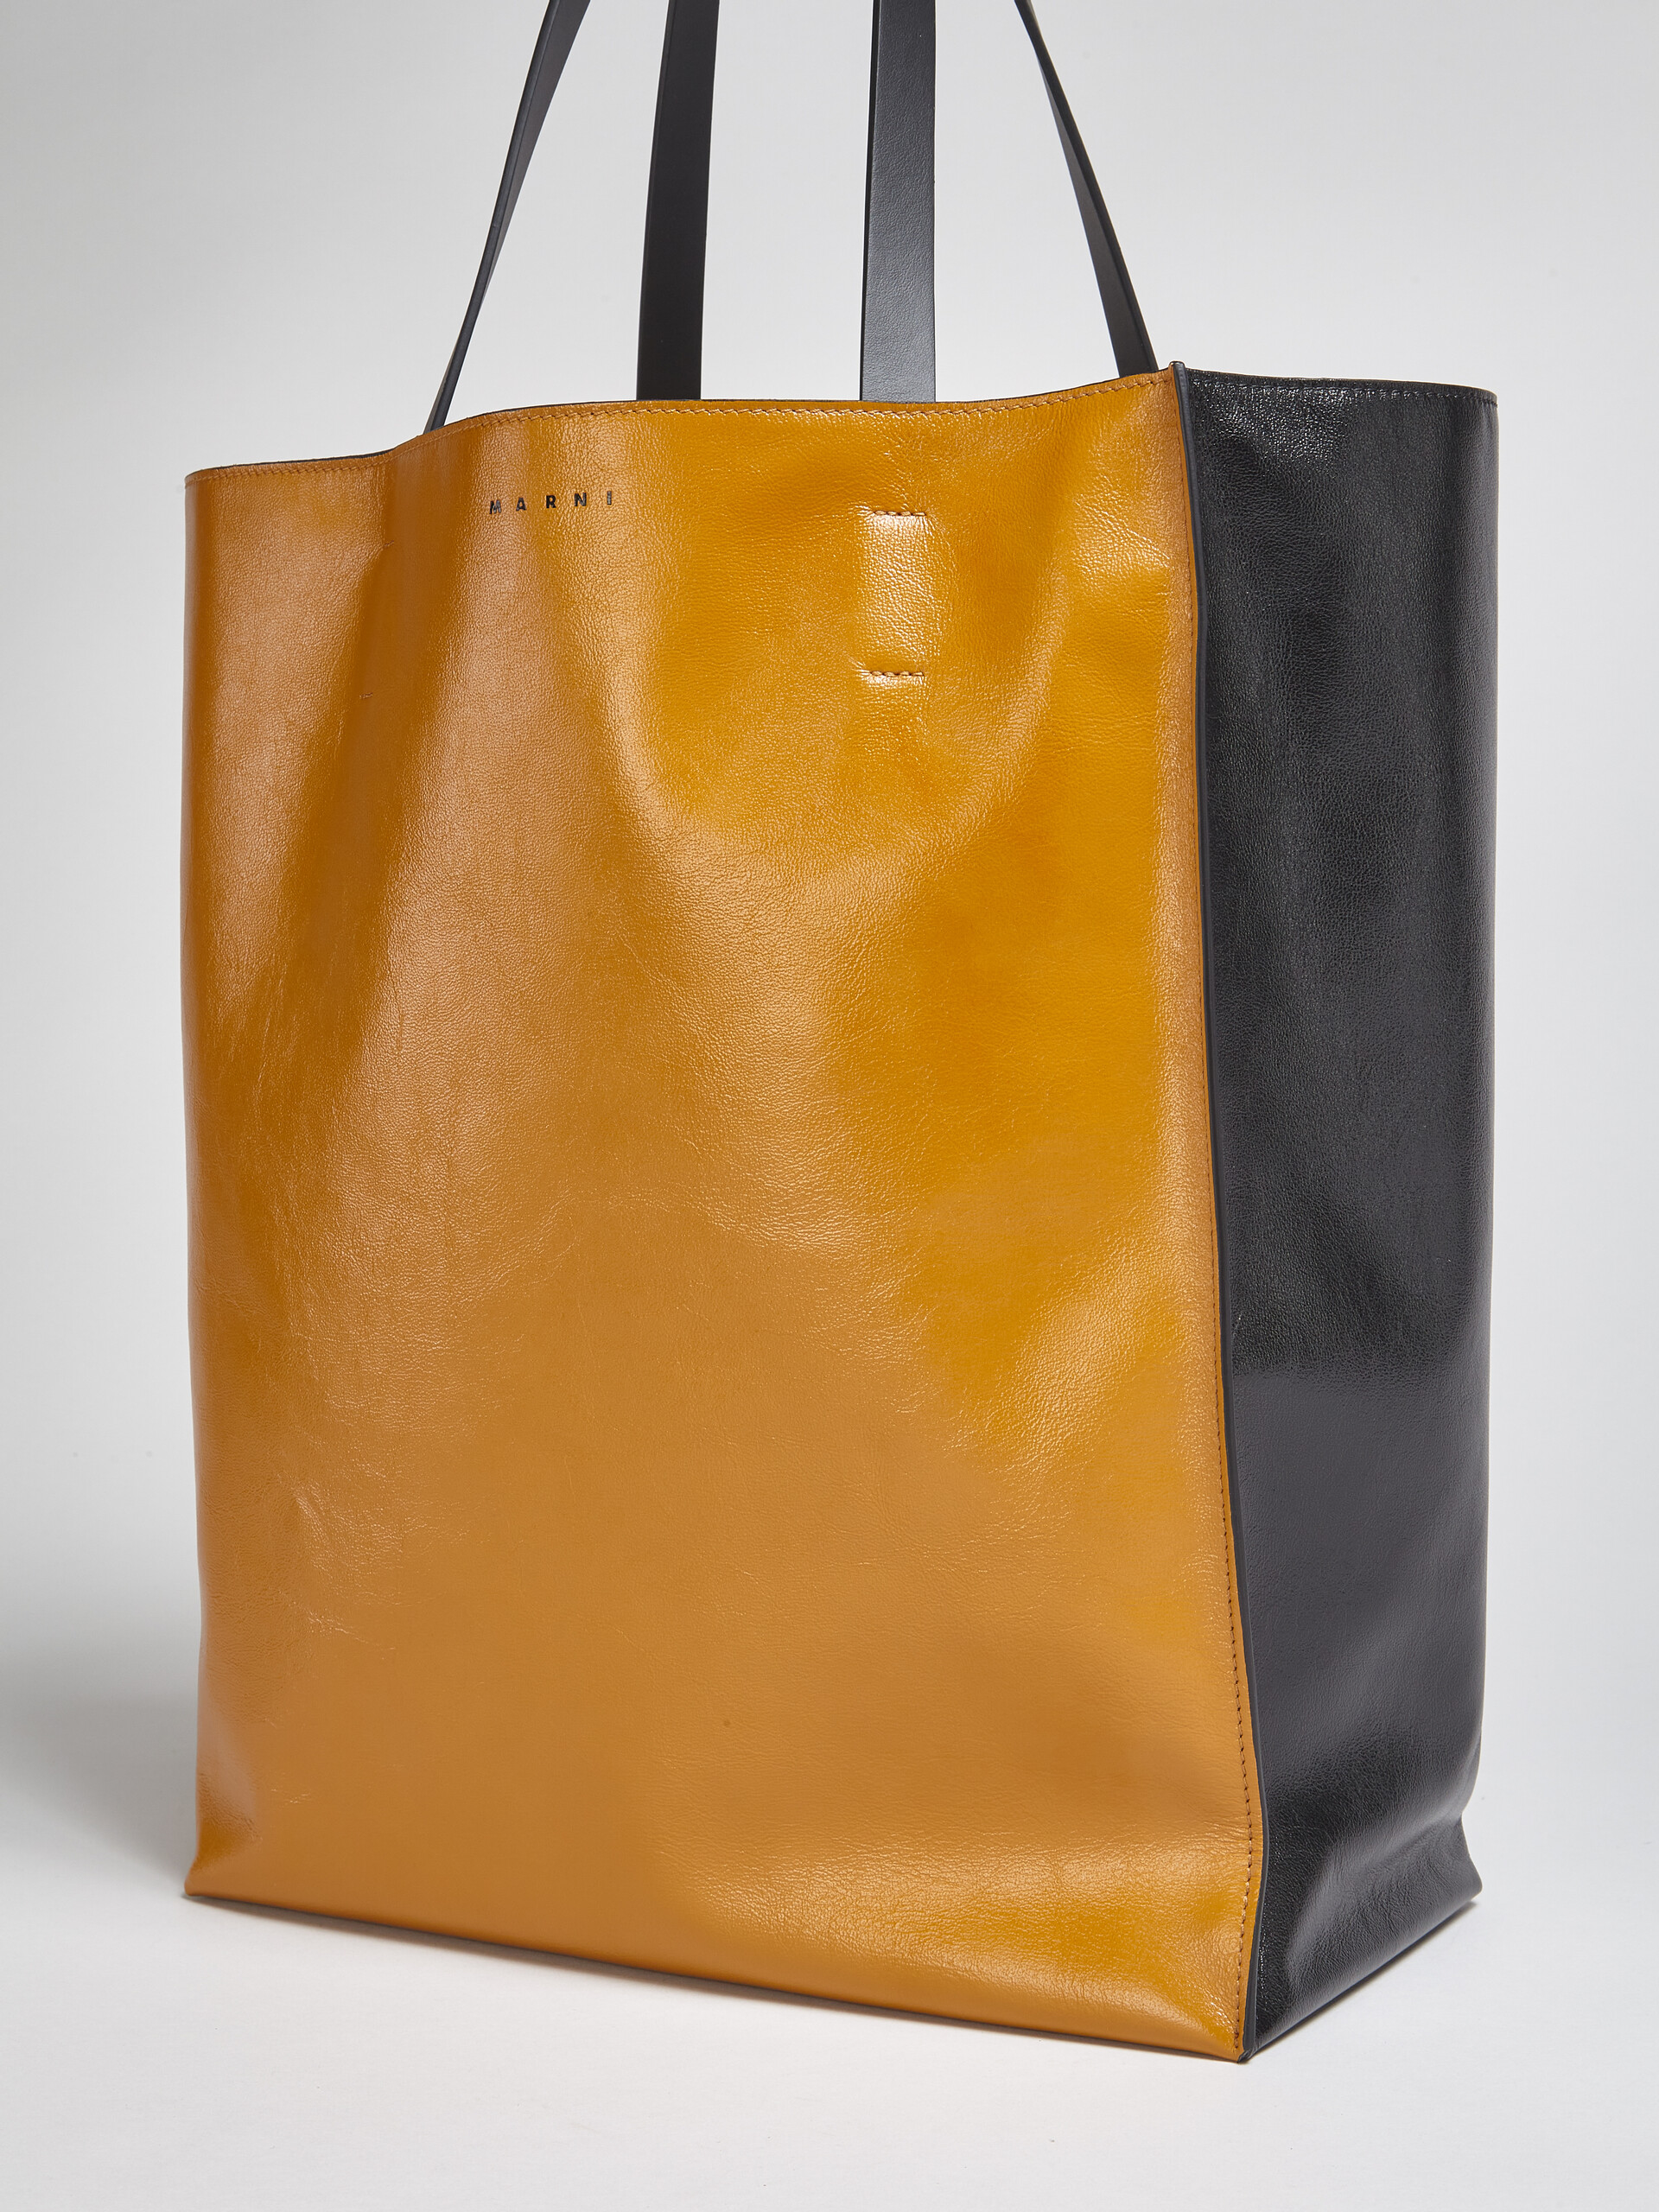 MUSEO SOFT bag in shiny brown and black leather - Shopping Bags - Image 4